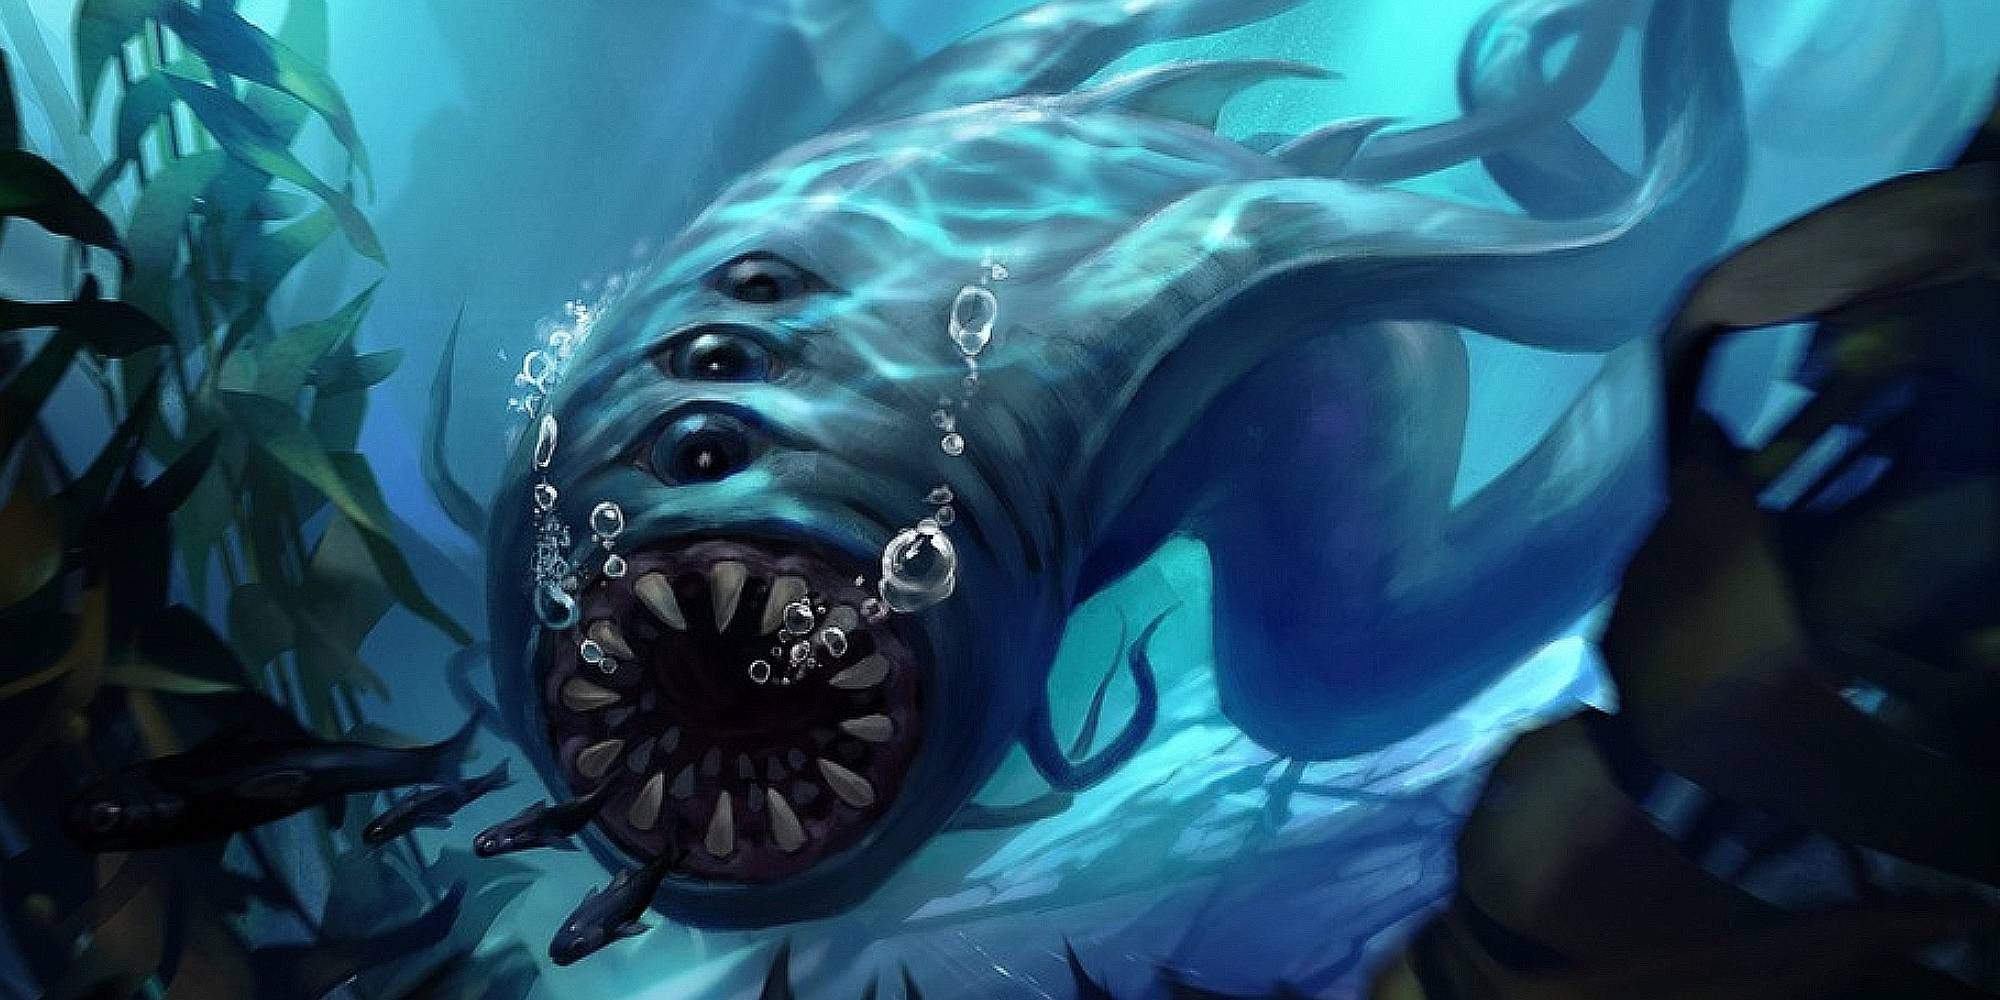 An Aboleth of Dungeons and Dragons swims in an underwater environment